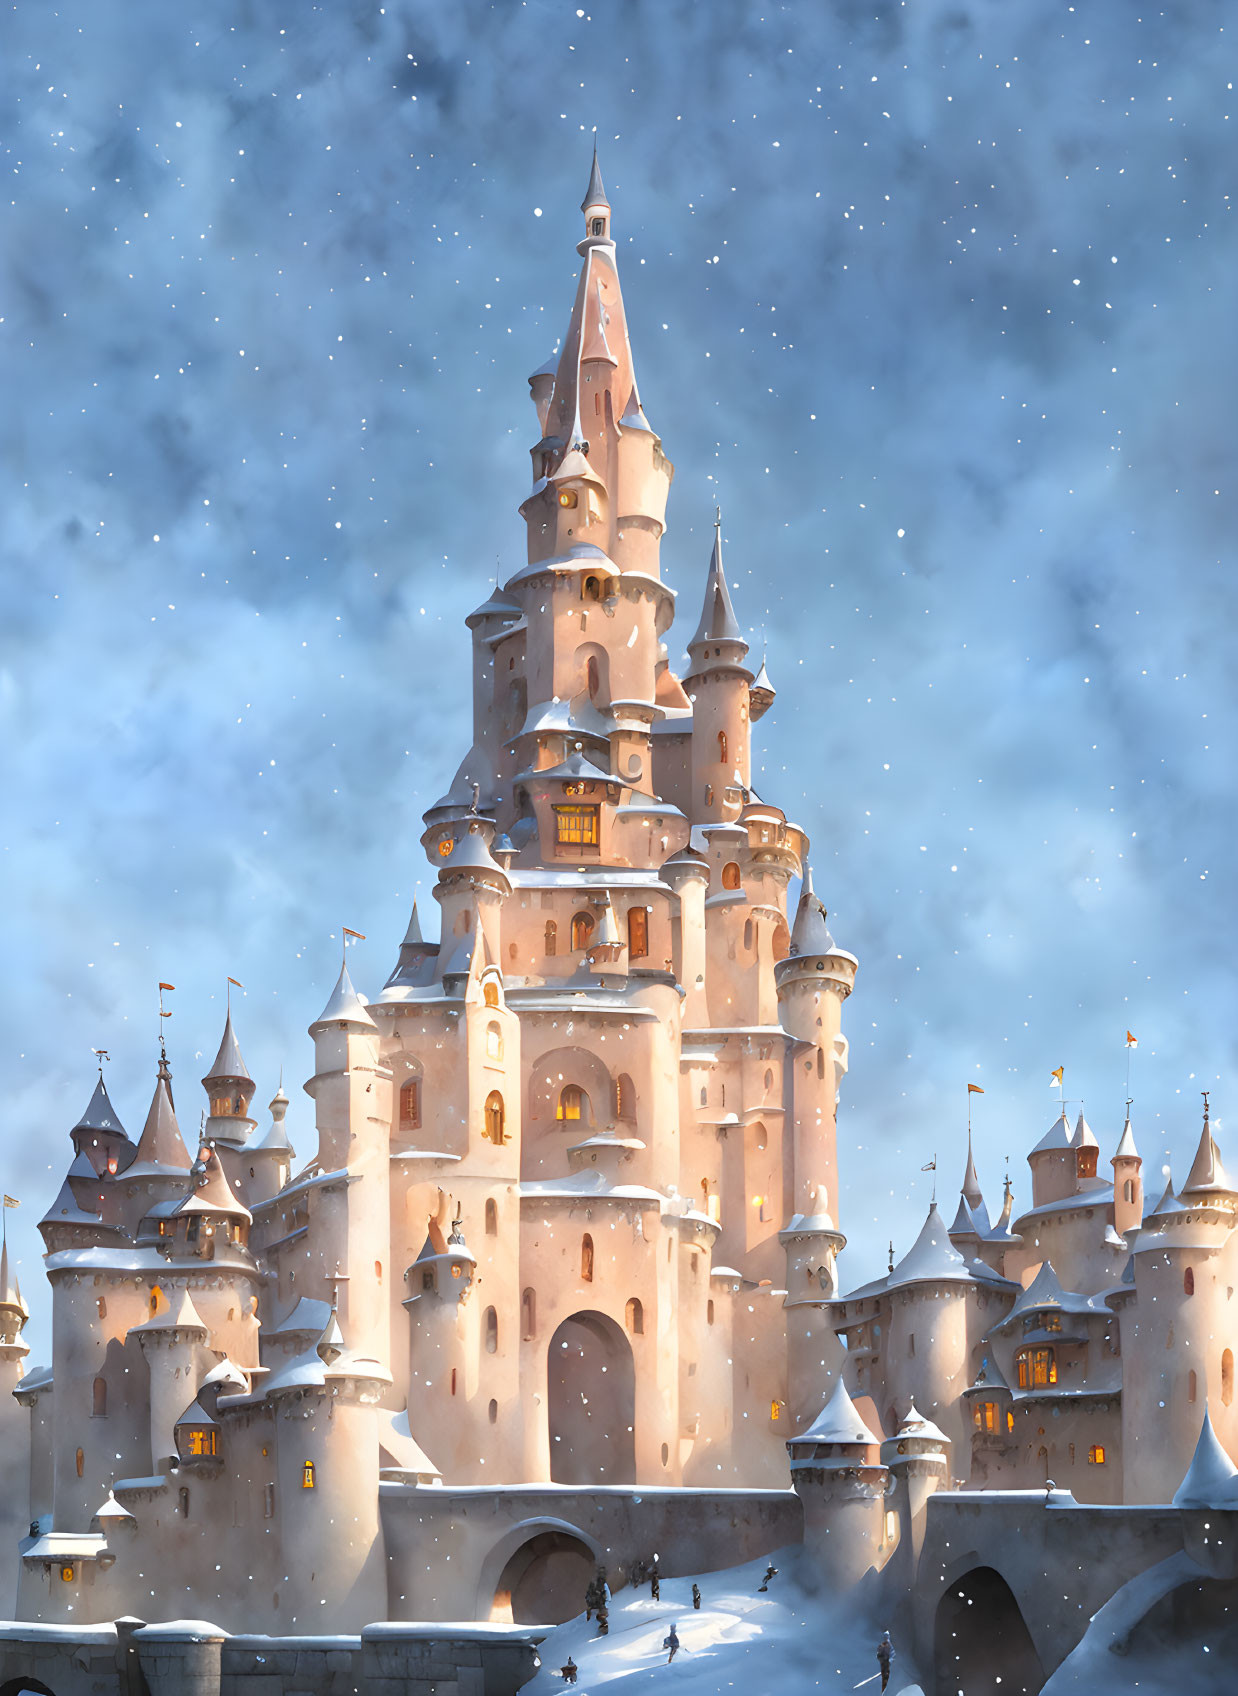 Tall Castle with Towers and Snowy Landscape at Twilight